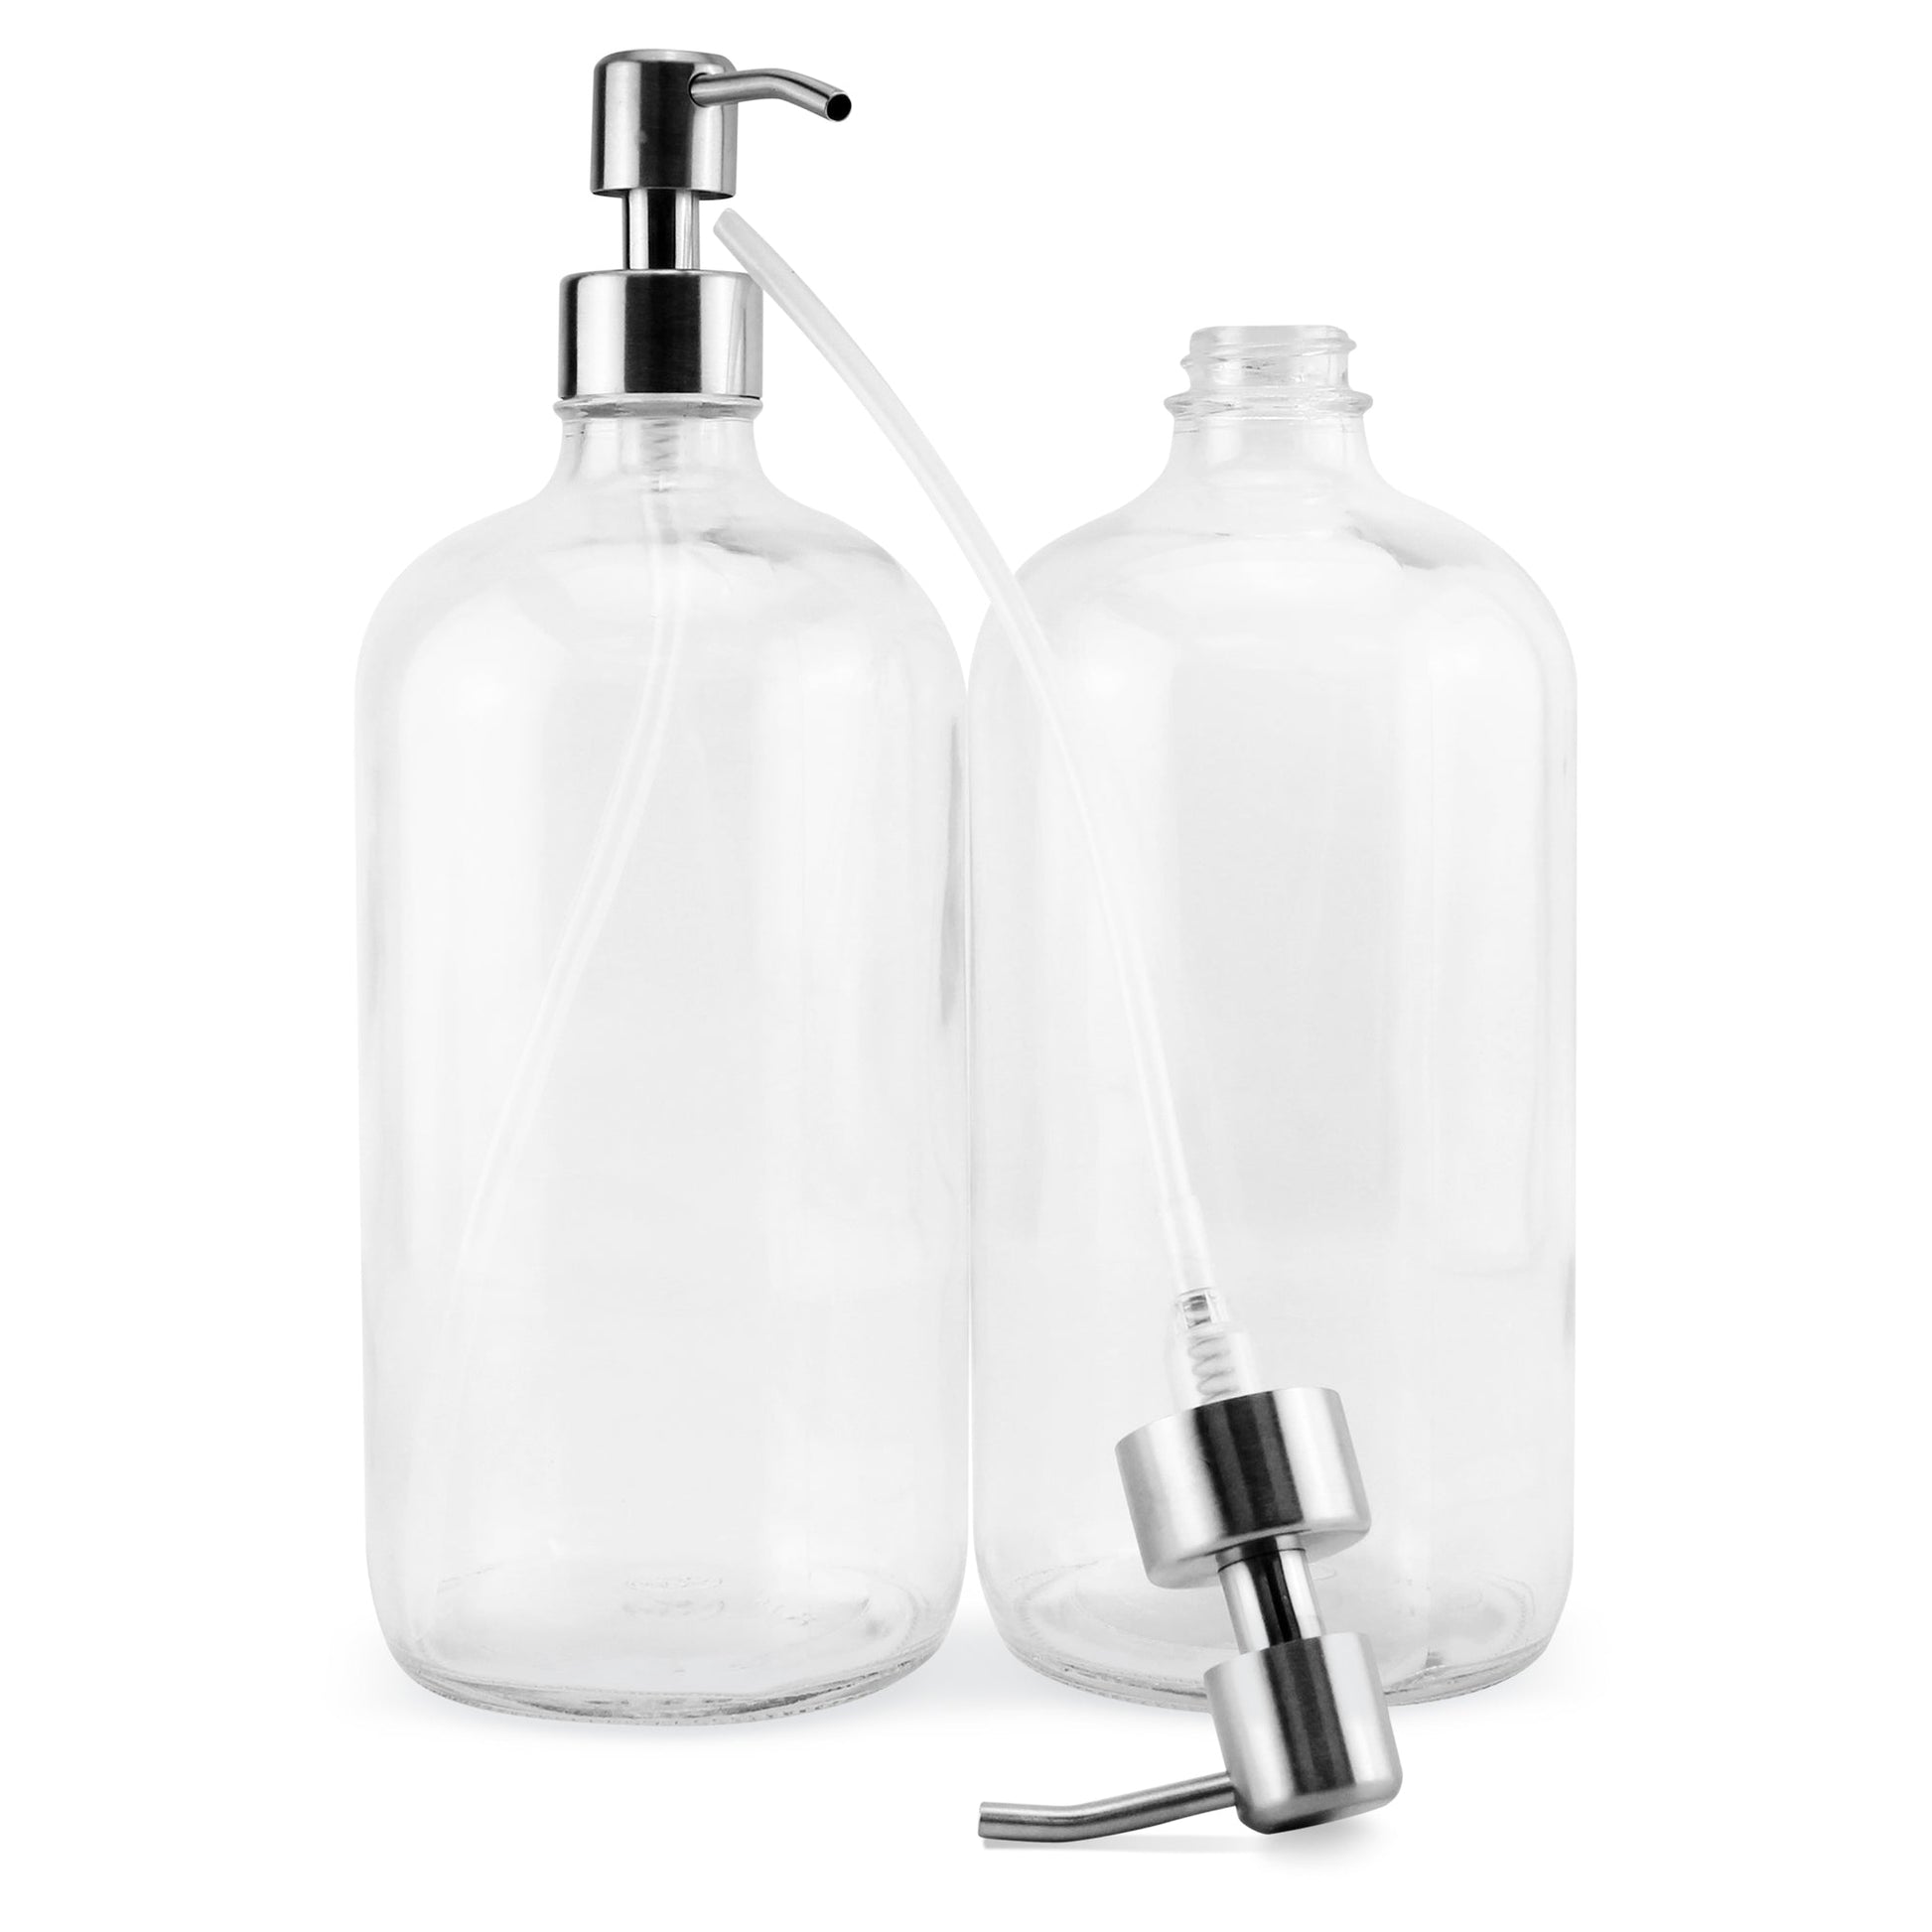 32oz Glass Pump Bottles with Stainless Steel Pump (2-Pack, Clear) - sh1772cb032oz